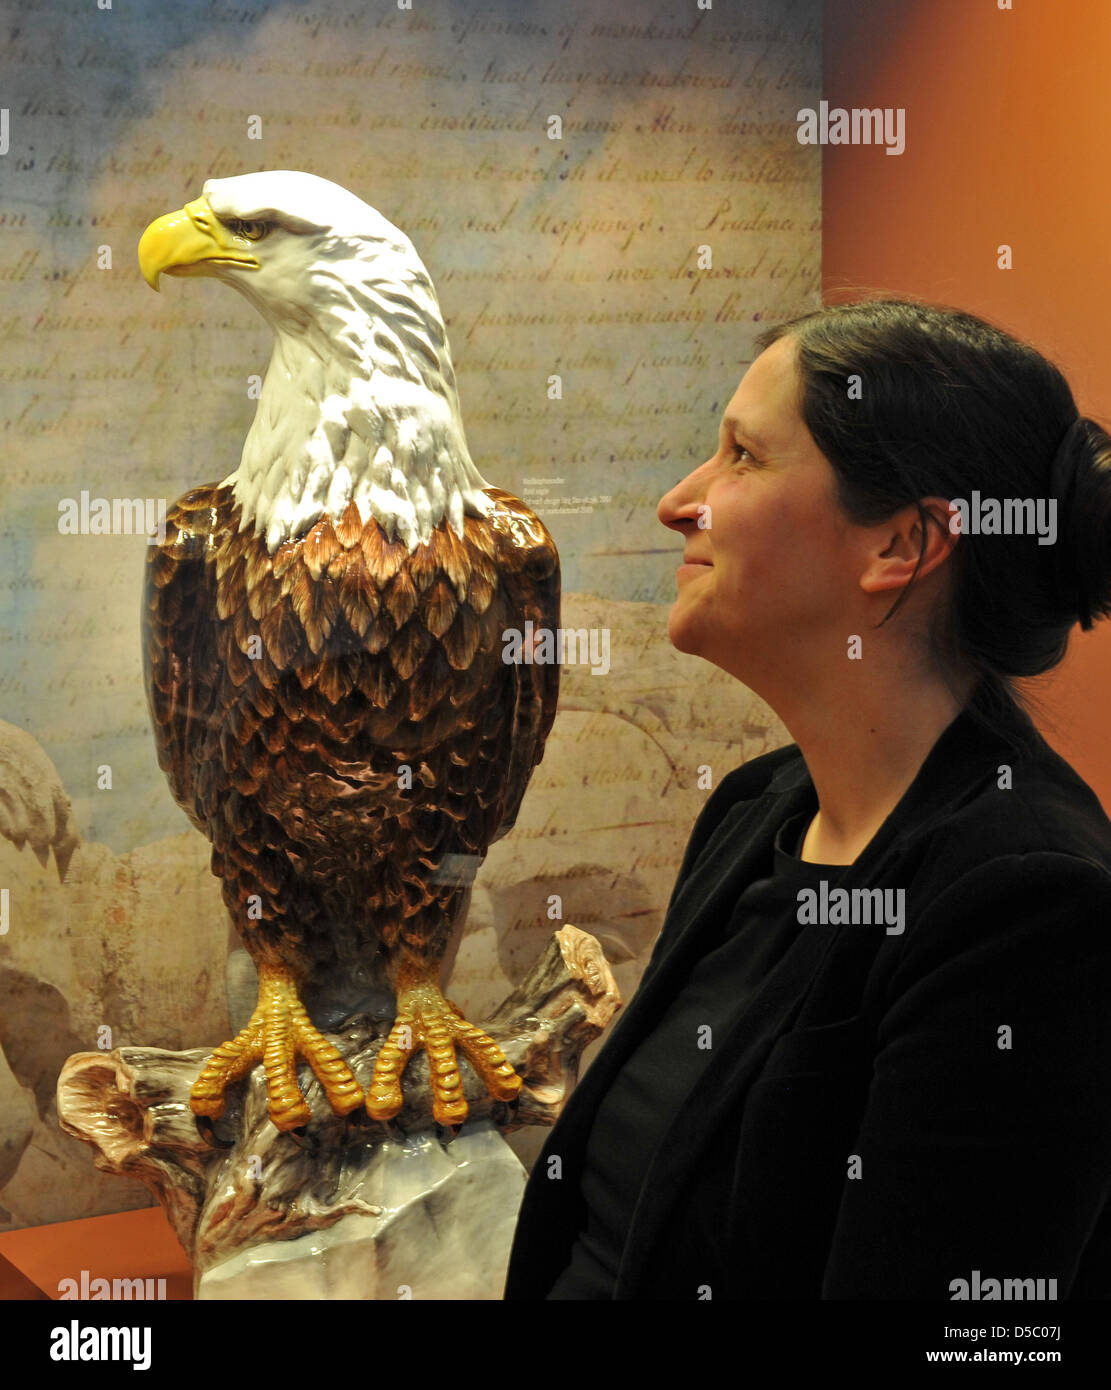 A staff member of Meissen Porcelain Manufactory eyes a sculpture of US heraldic animal, a bald eagle, that is part of the exhibition celebrating the 300th anniversary of Meissen Porcelain in Meissen, Germany, 20 January 2010. The exhibition 'All Nations Are Welcome' is the company's largest special exhibition and will open on 23 January 2010. In 2008, the manufactory with the 'cros Stock Photo